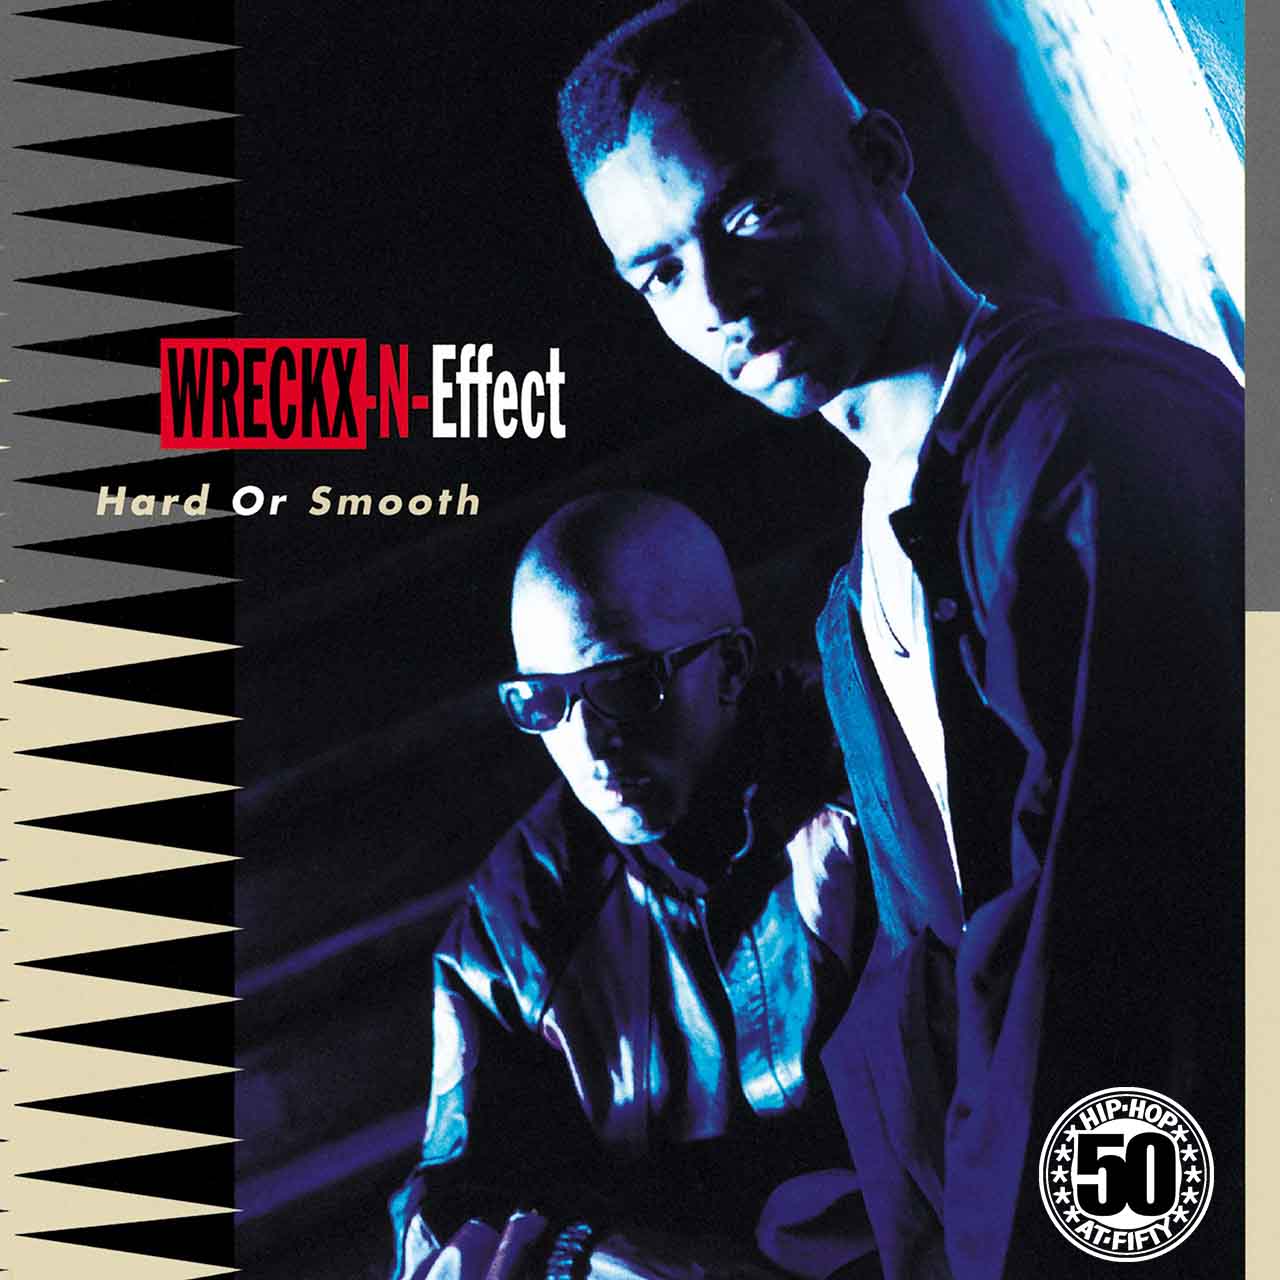 Hard Or Smooth': Wreckx-n-Effect's New Jack Swing Classic